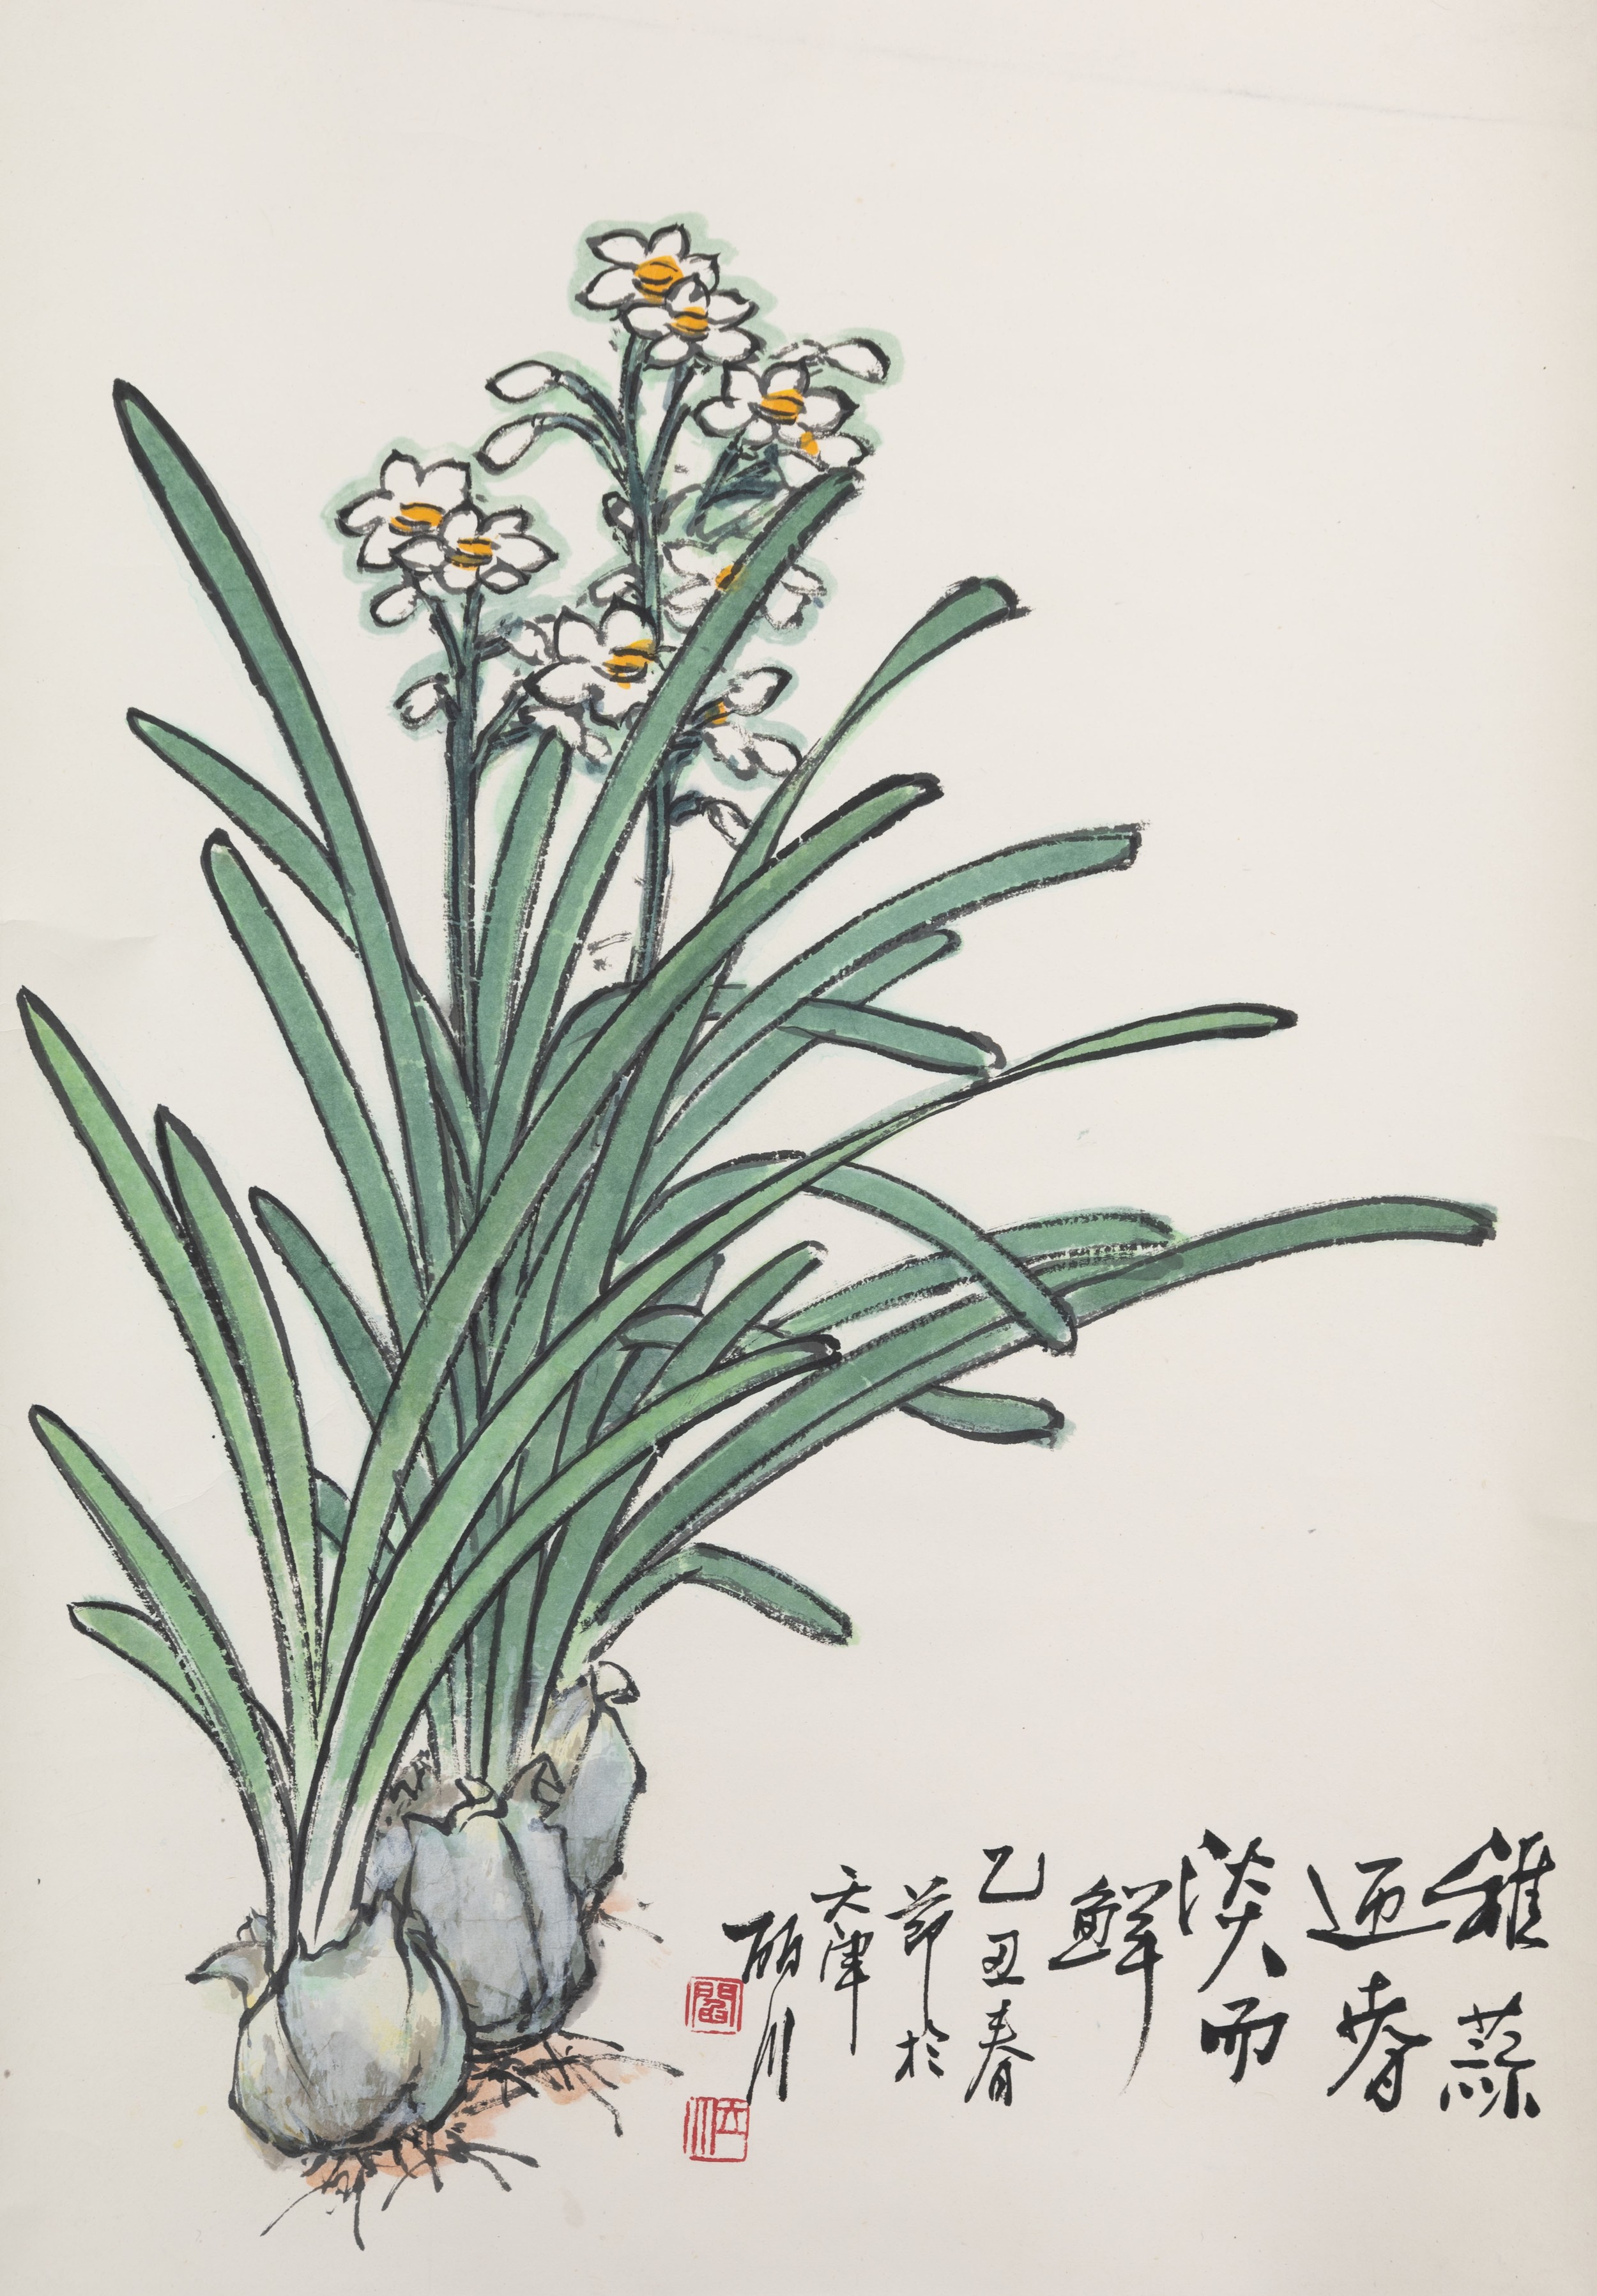 CHINESE SCROLL PAINTING OF NARCISSUS FLOWERS BY PROF. YAN TIEZHEN, painted in Tianjin, ink on paper, - Image 3 of 3